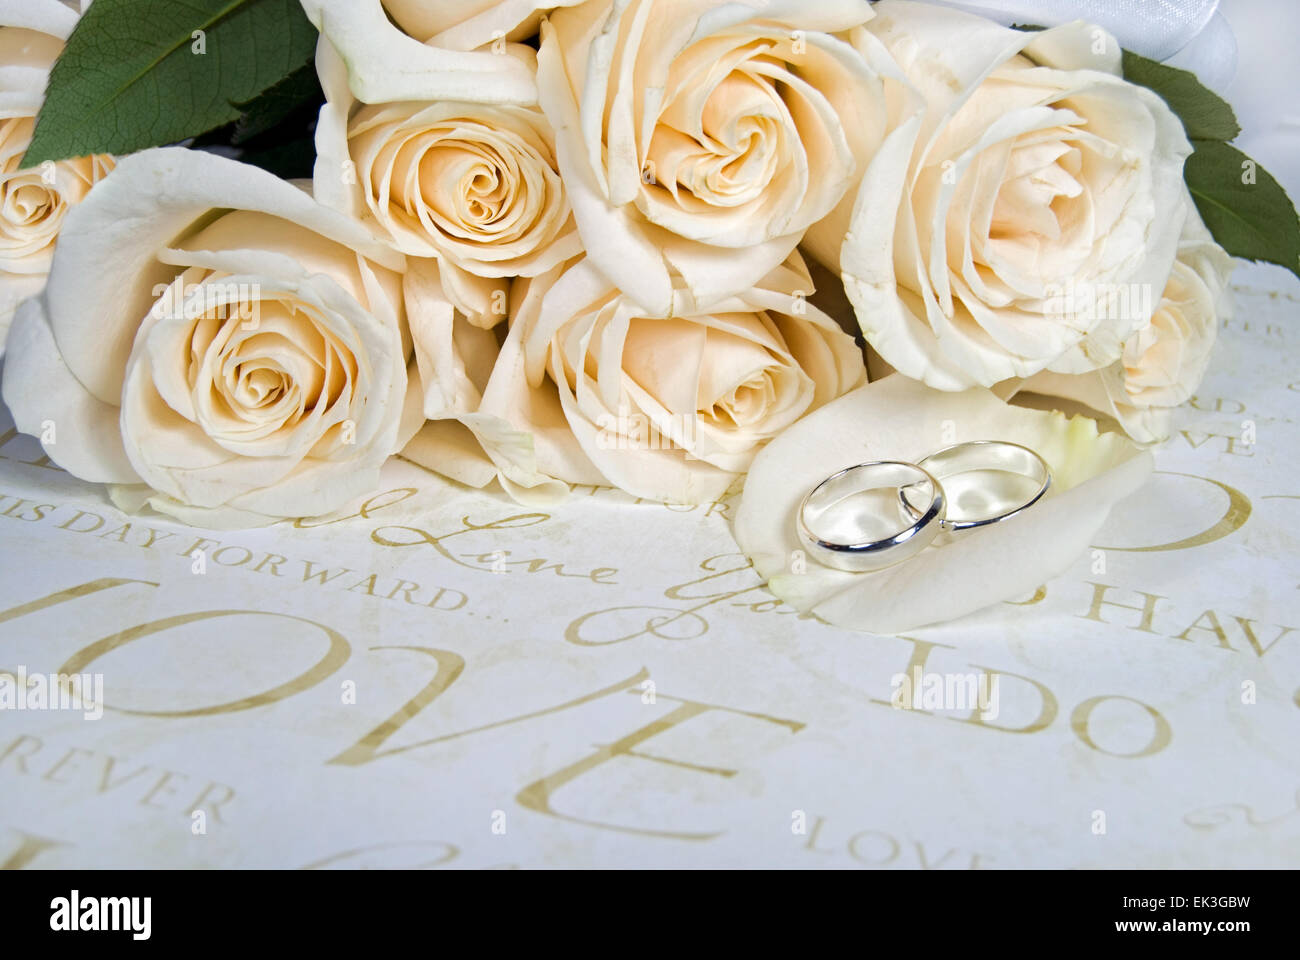 Wedding rings on rose petal with white bridal rose bouquet. Stock Photo